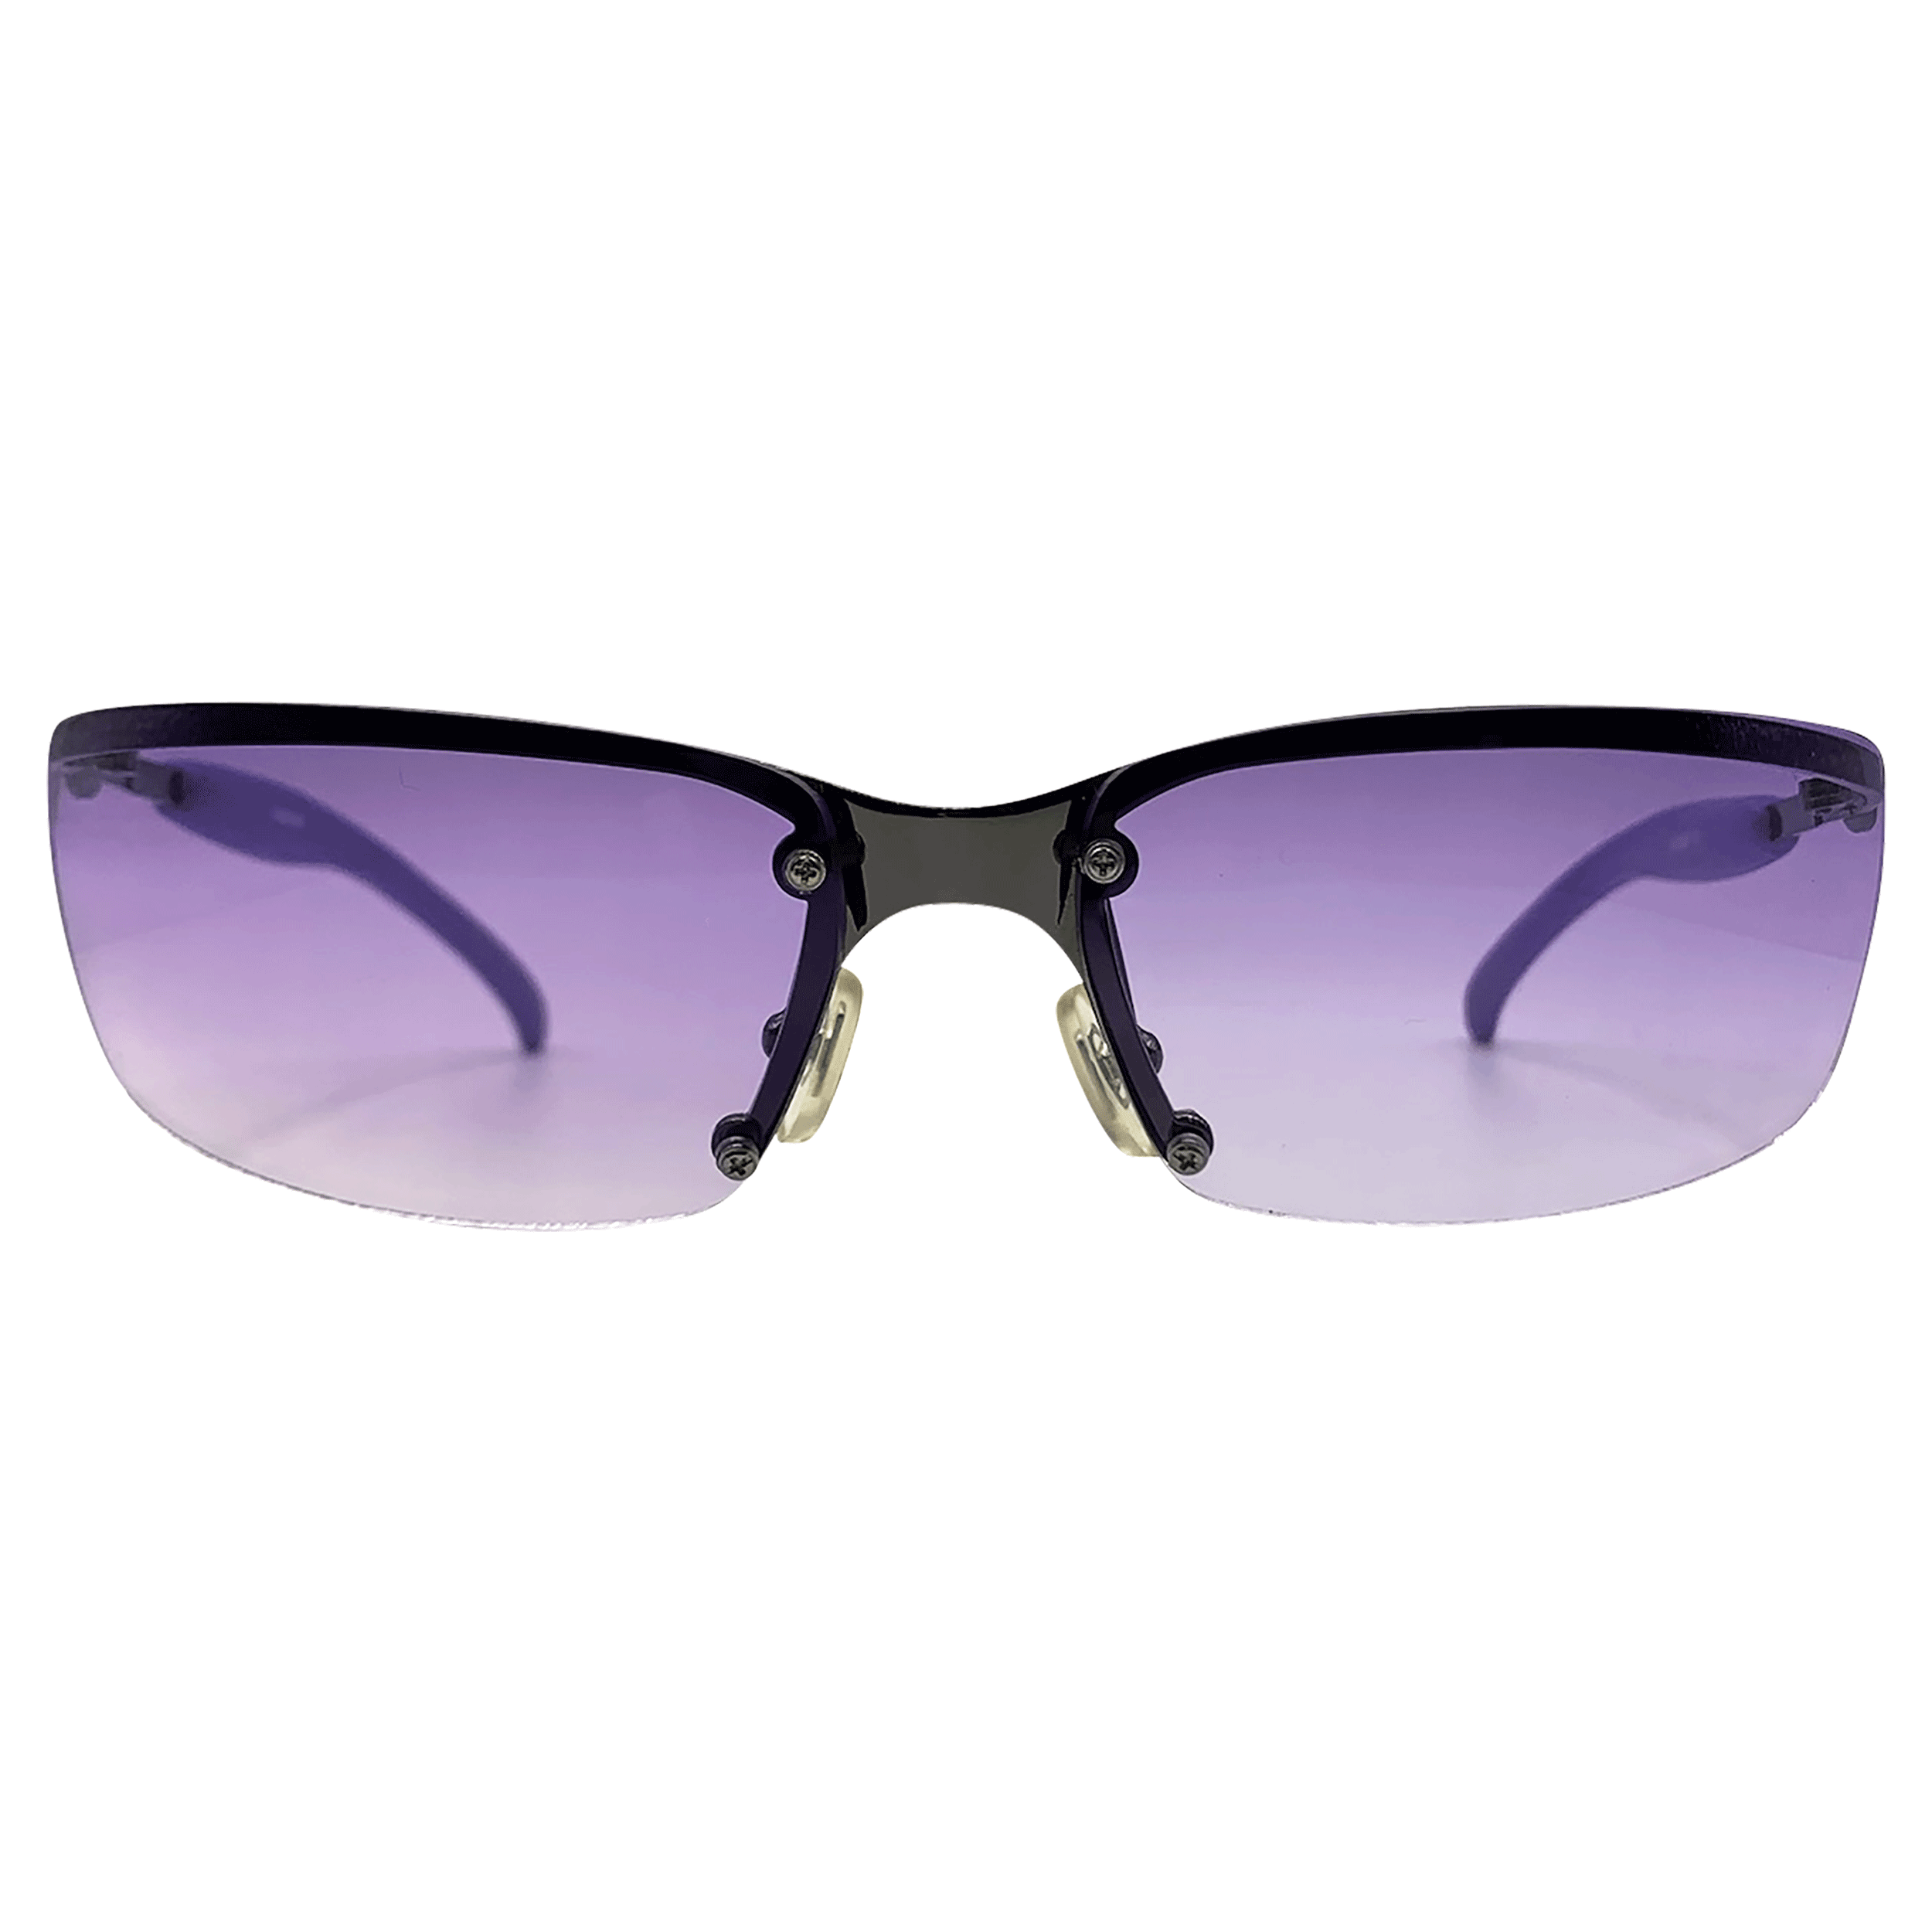 FIREFLY Colorful Rimless Sunglasses